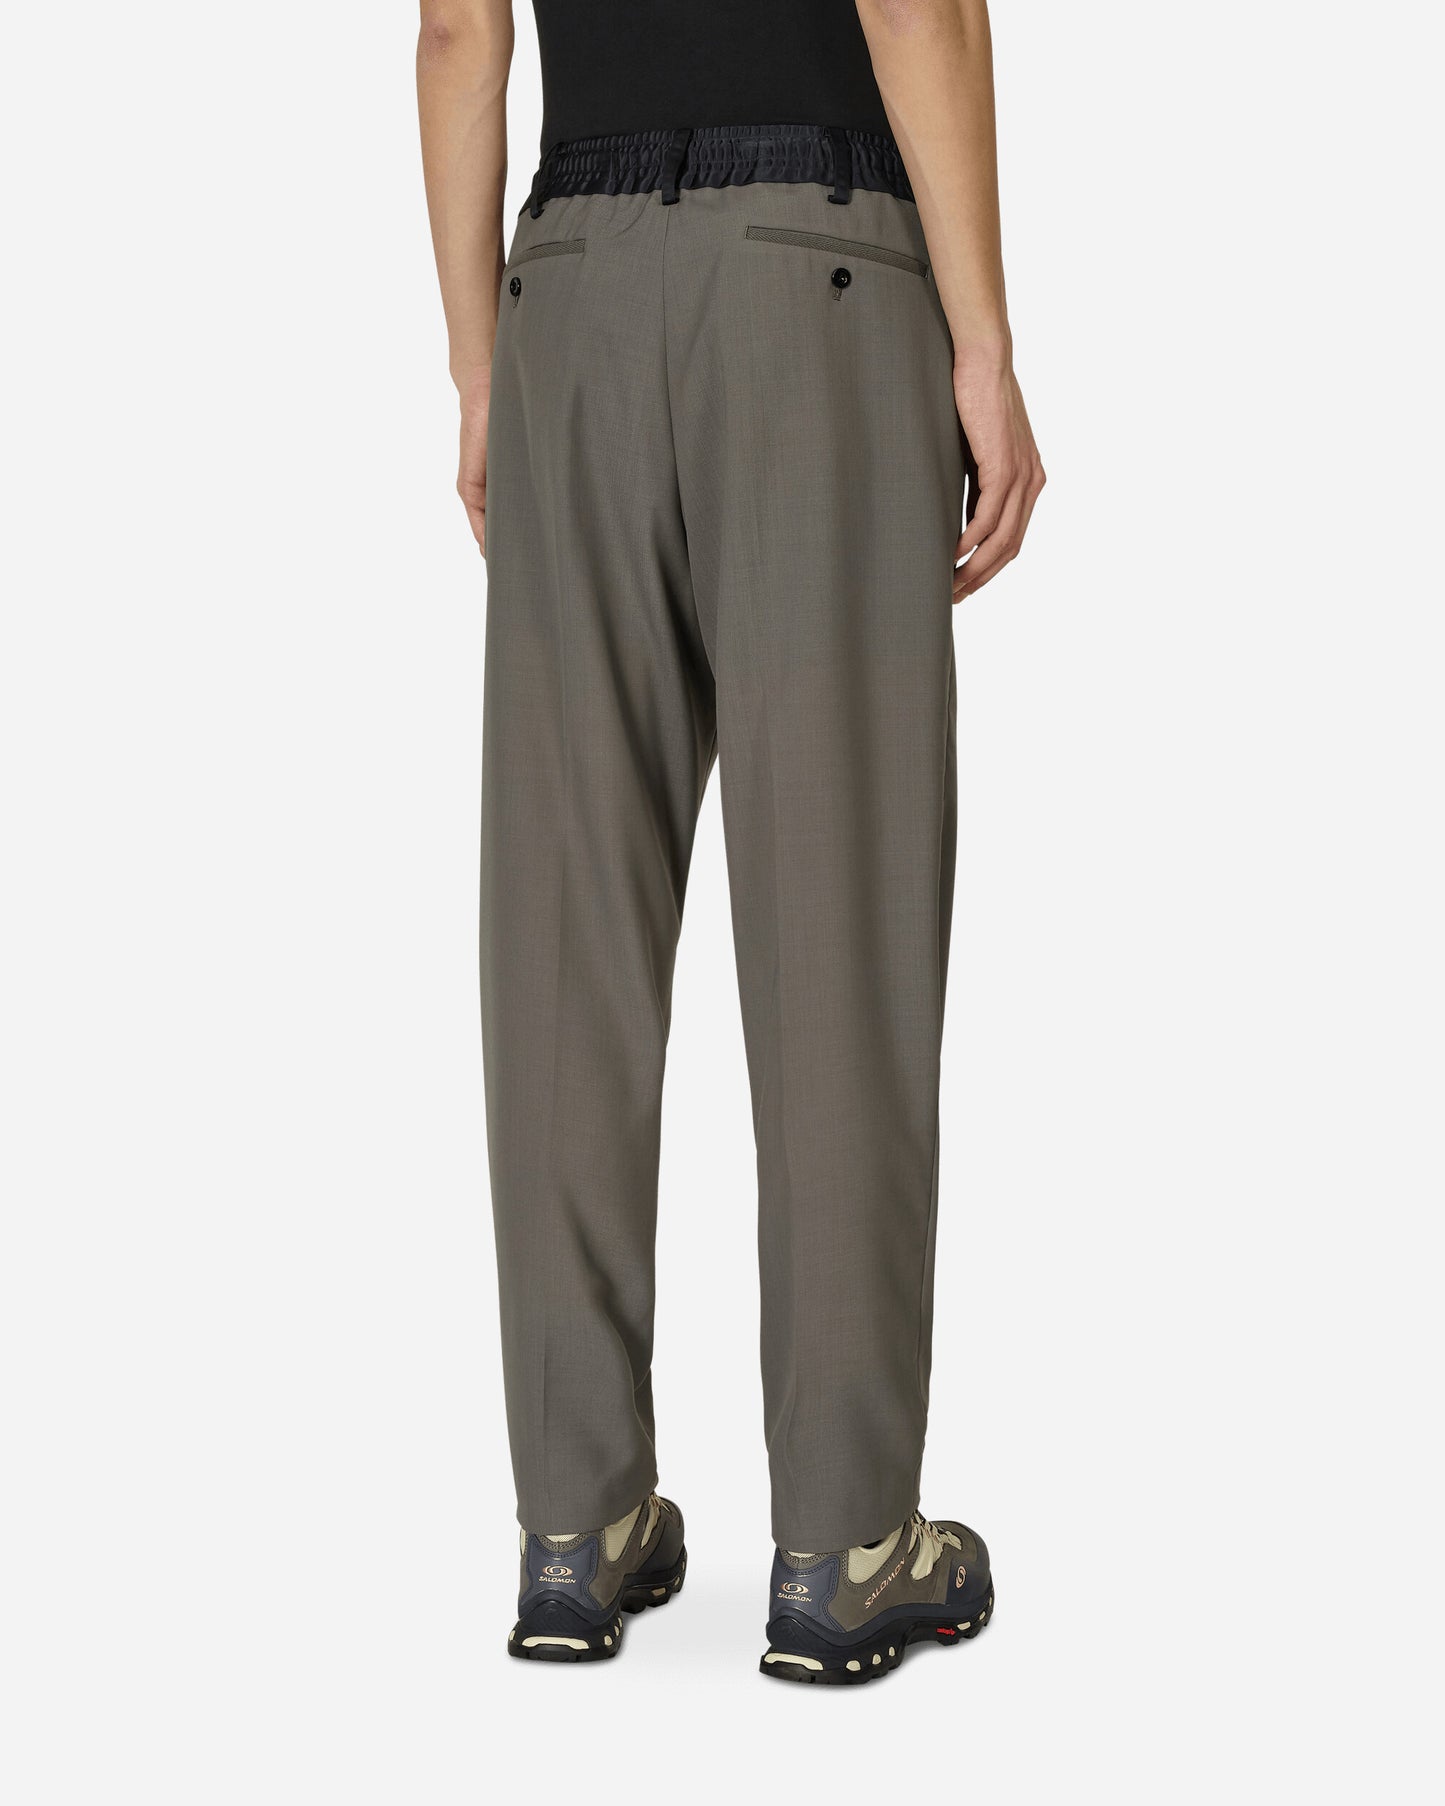 Sacai Suiting Pants Taupe Pants Trousers 23-02952M 550